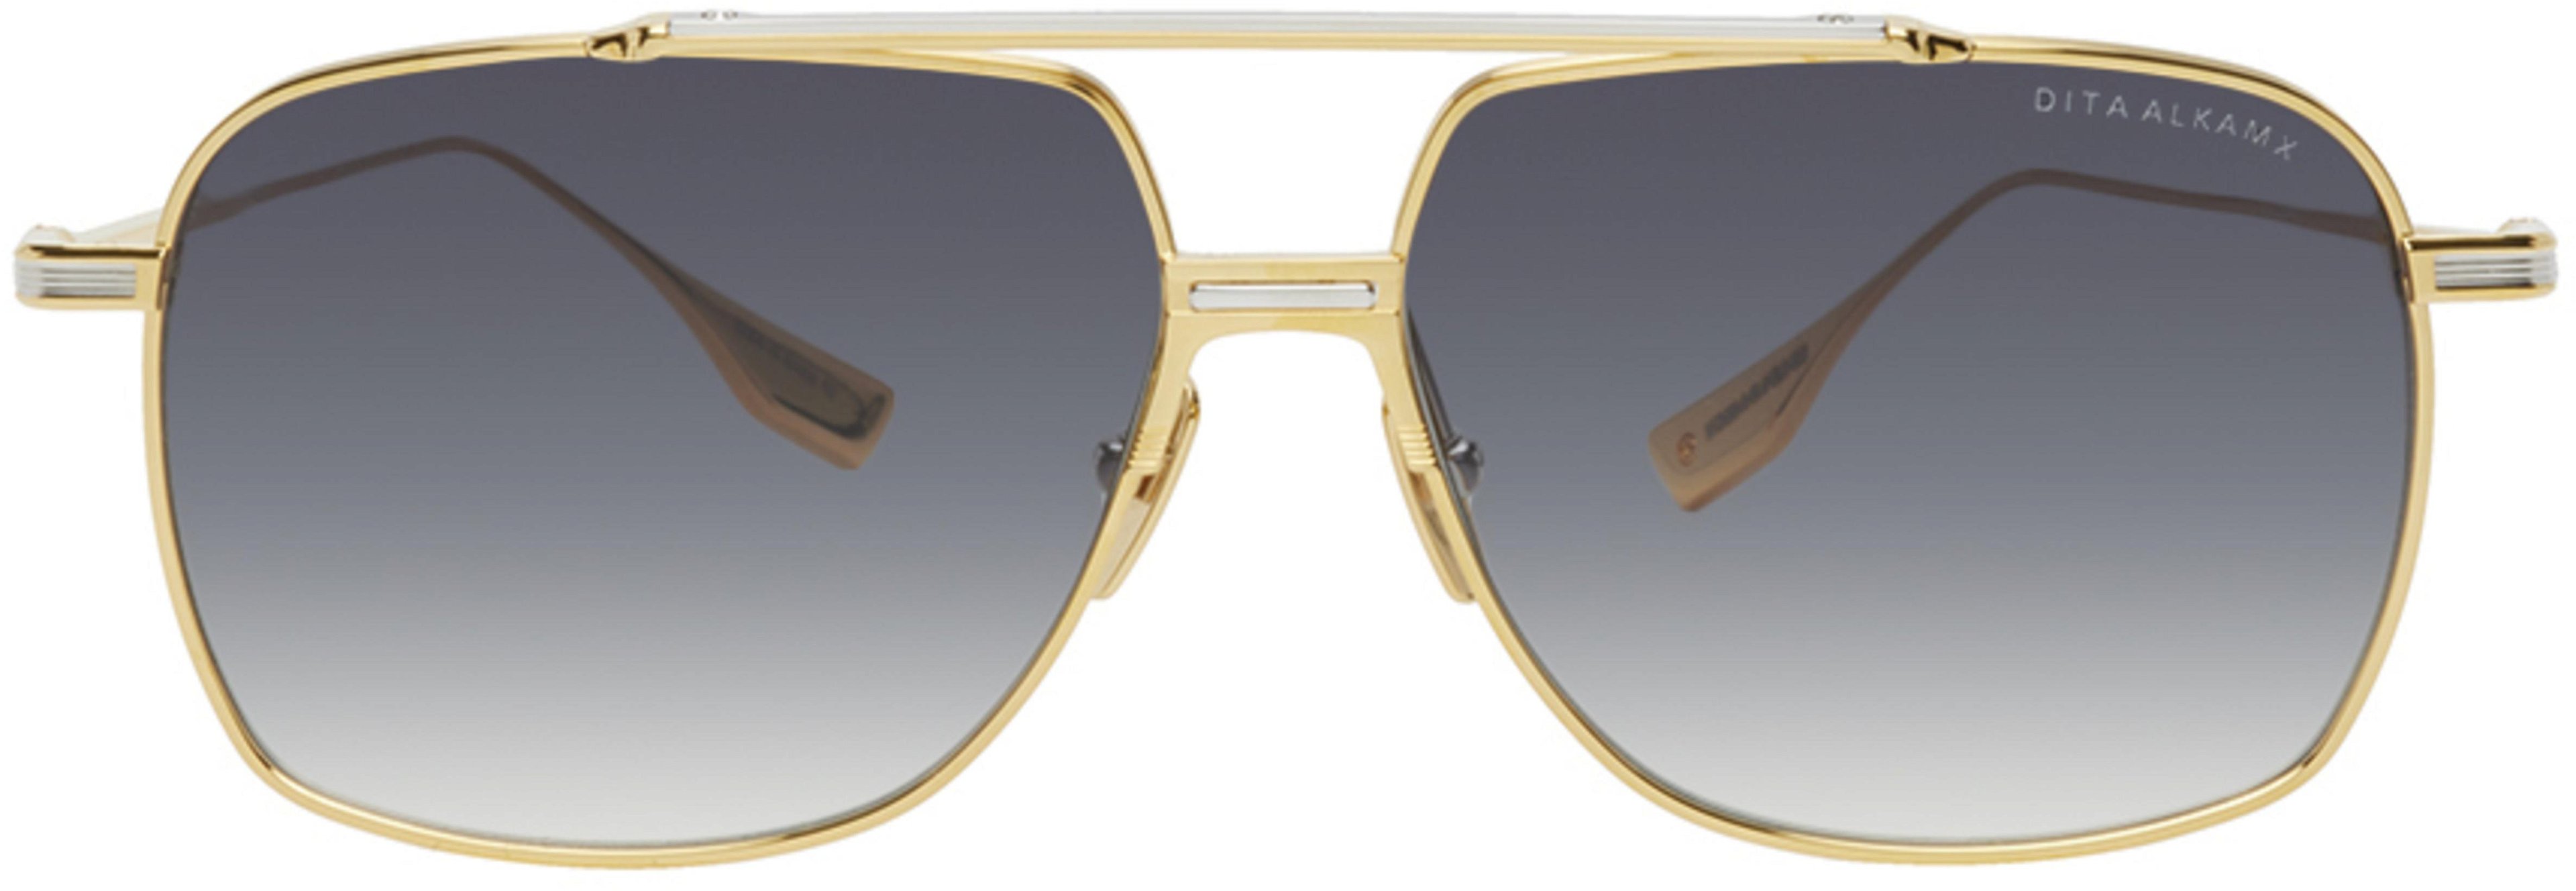 Gold & Silver Alkamx Sunglasses by DITA